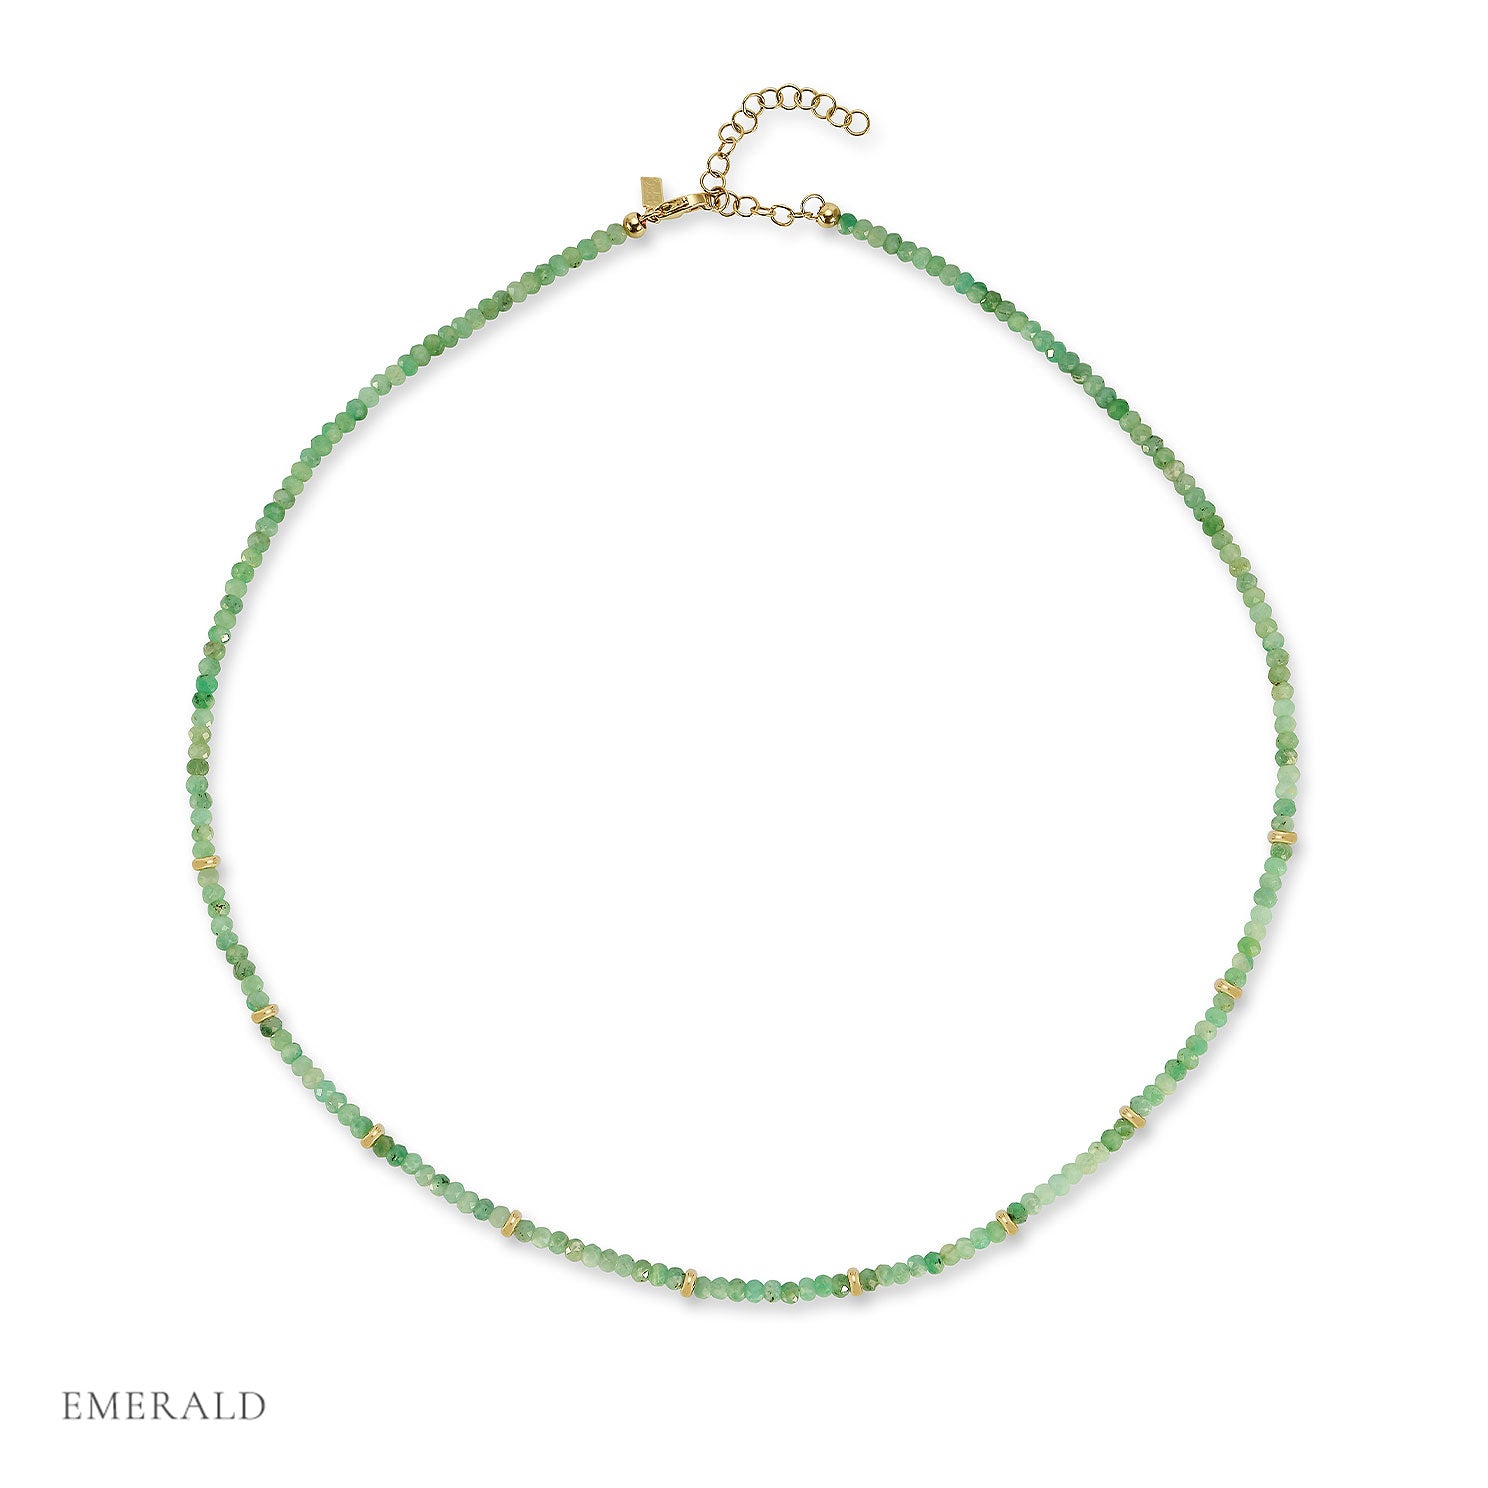 Birthstone Bead Necklace In Emerald with 14k yellow gold chain